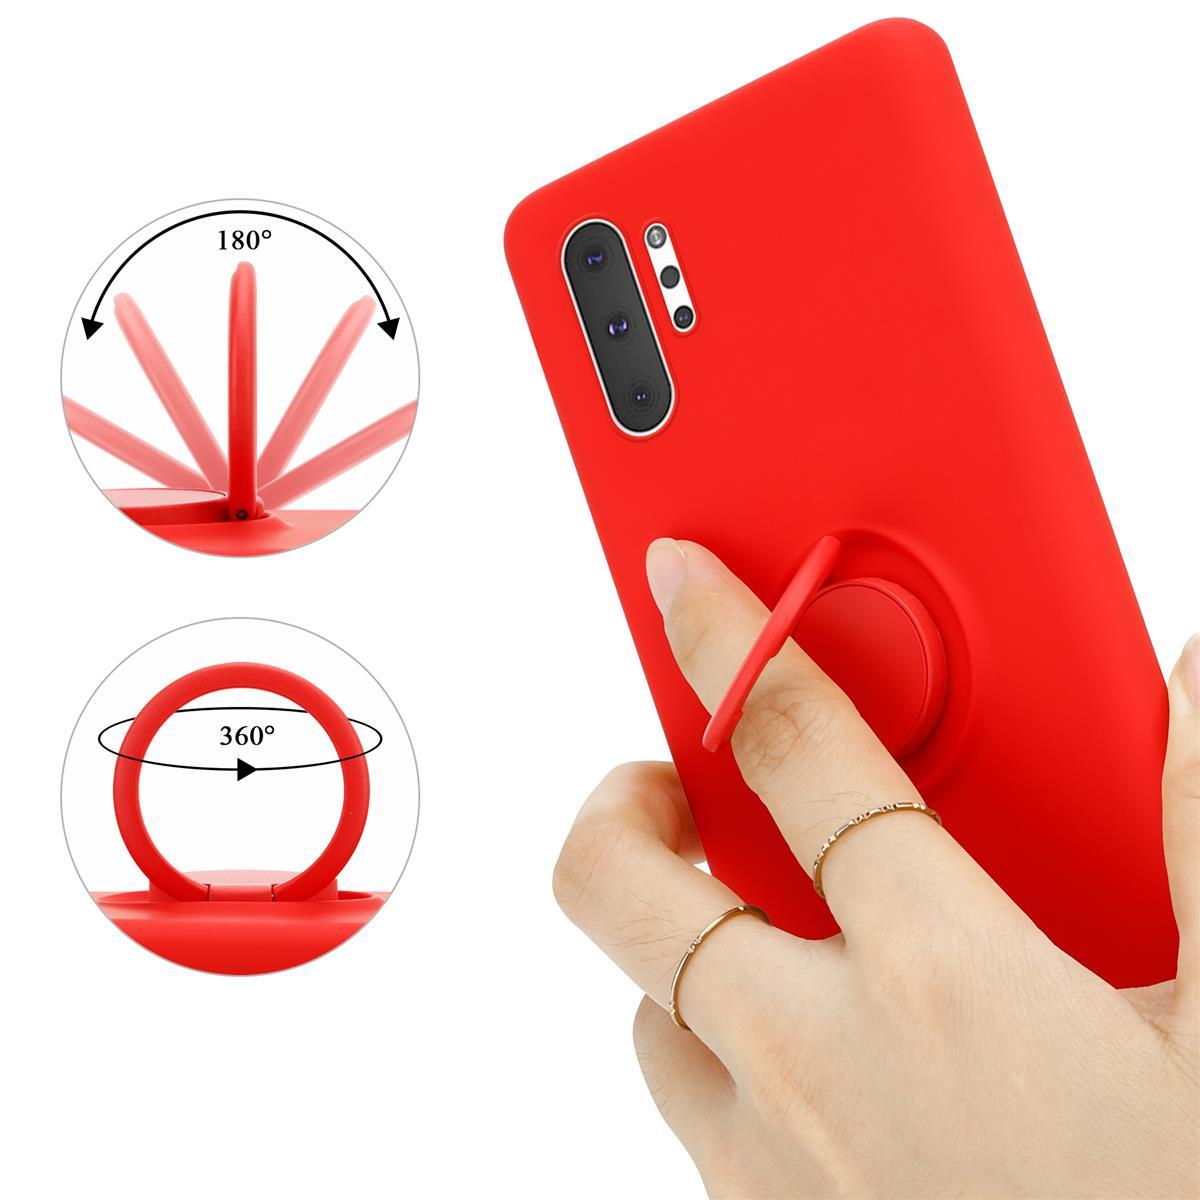 Samsung, Liquid Galaxy Style, Backcover, ROT Silicone Ring 10 Case CADORABO LIQUID im Hülle PLUS, NOTE